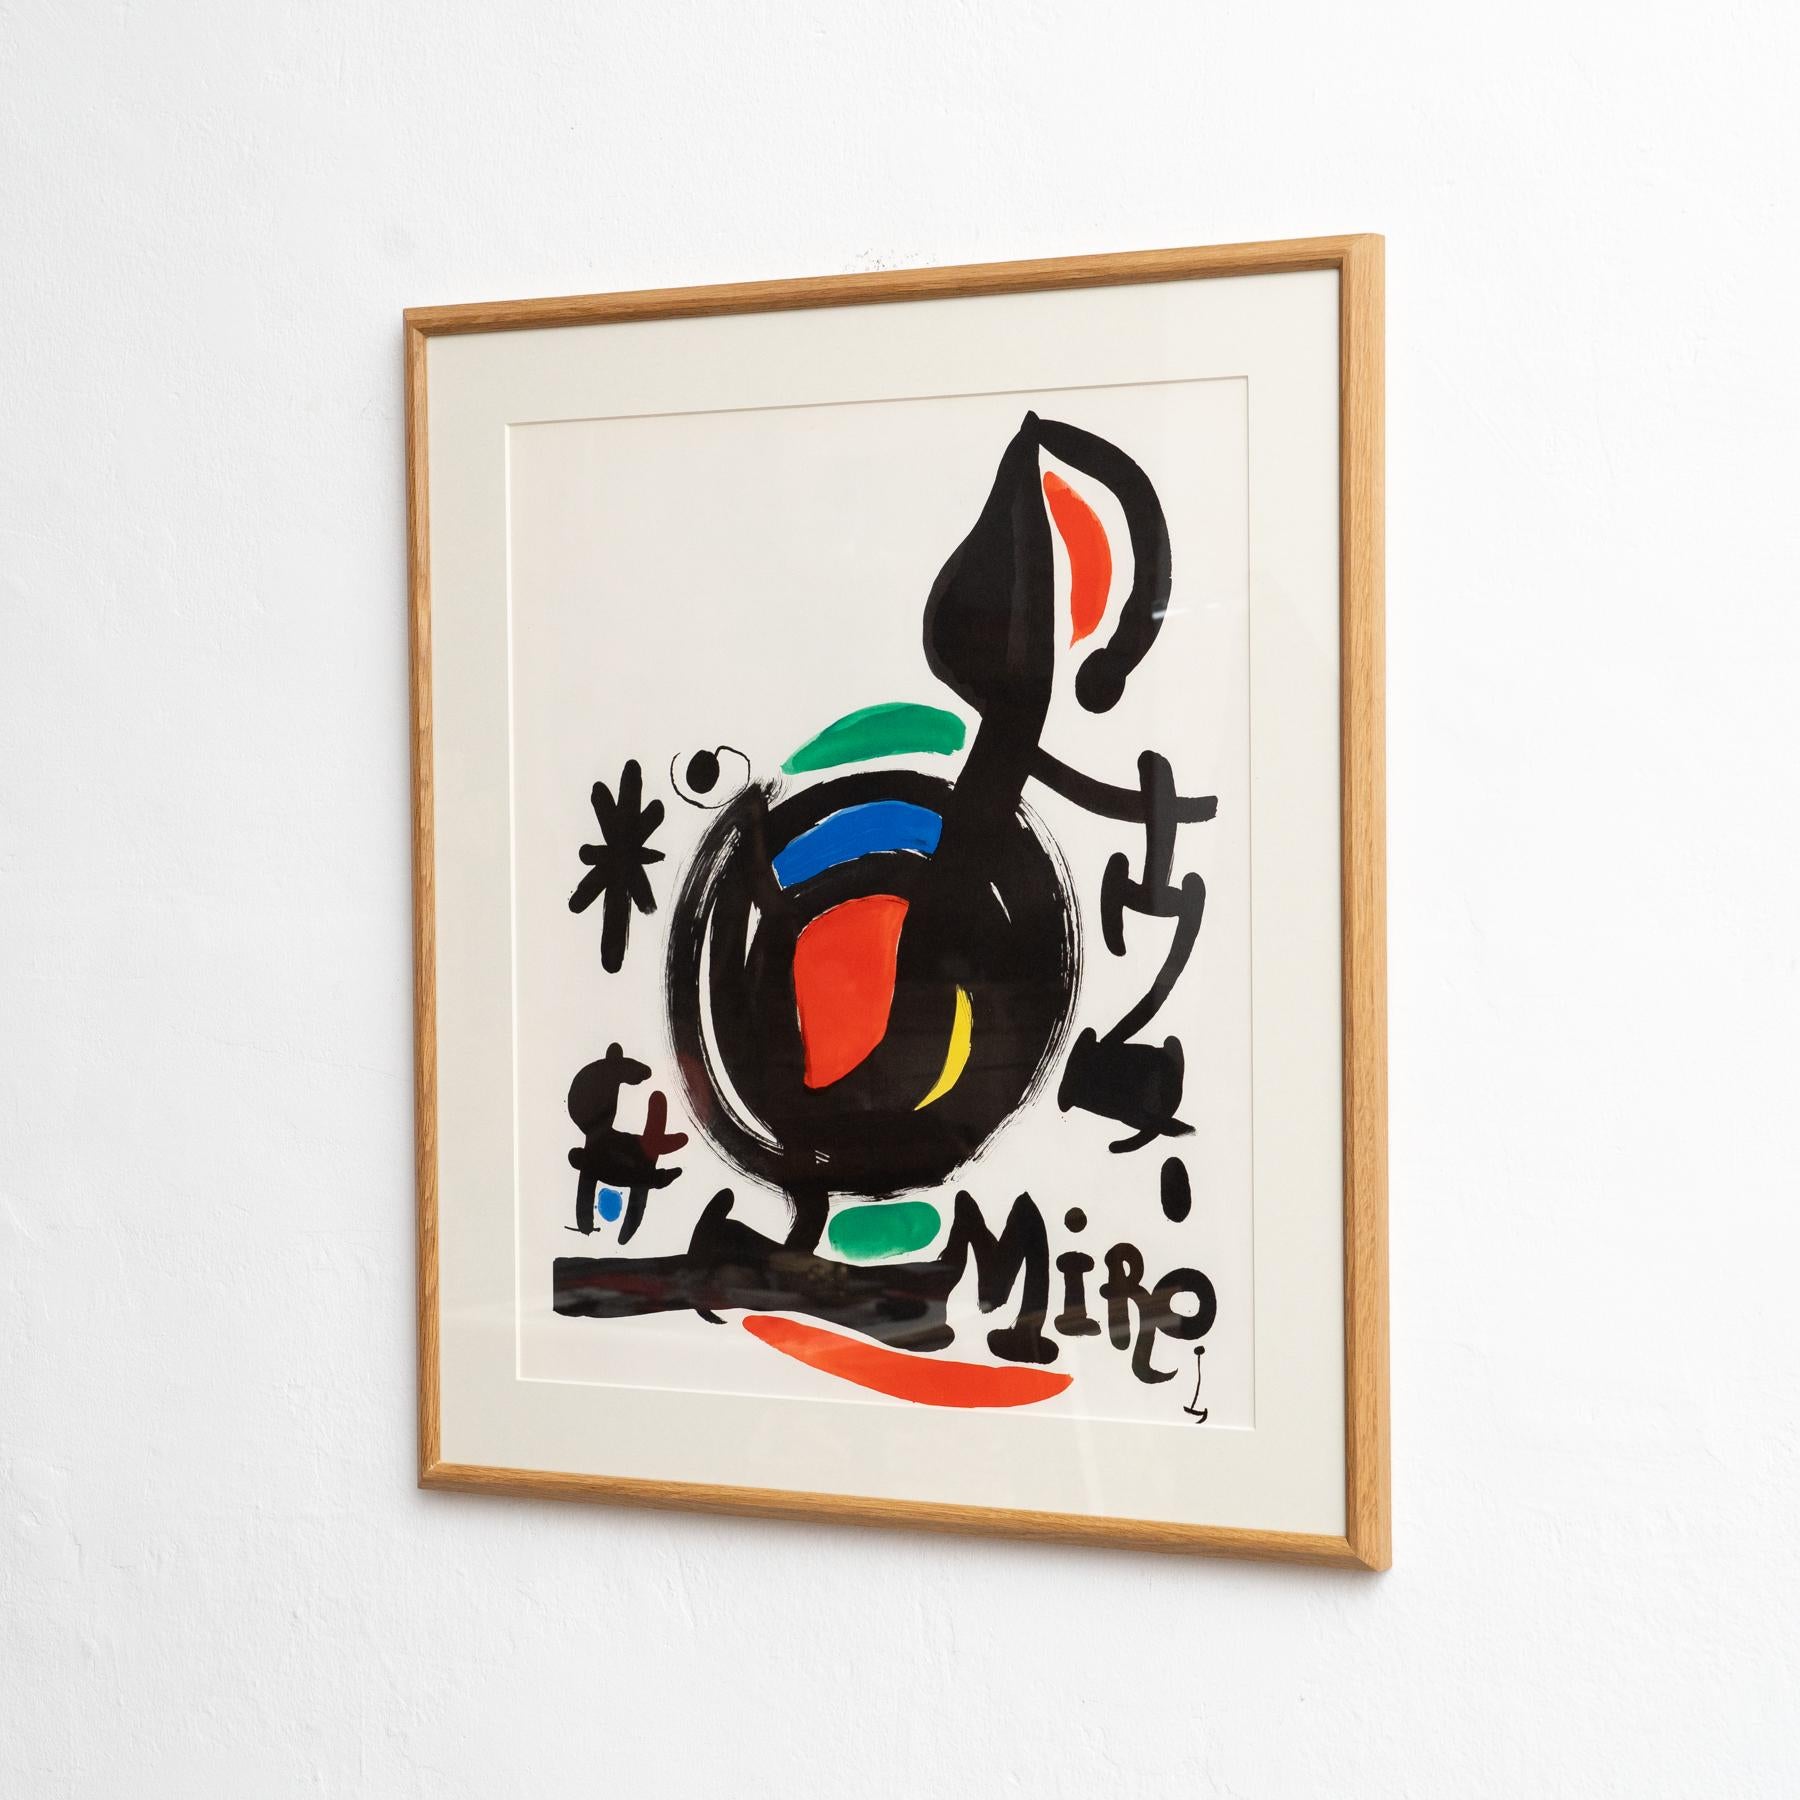 Mid-Century Modern  High Quality Fine Art Color Framed Lithography by Joan Miró, circa 1960. For Sale